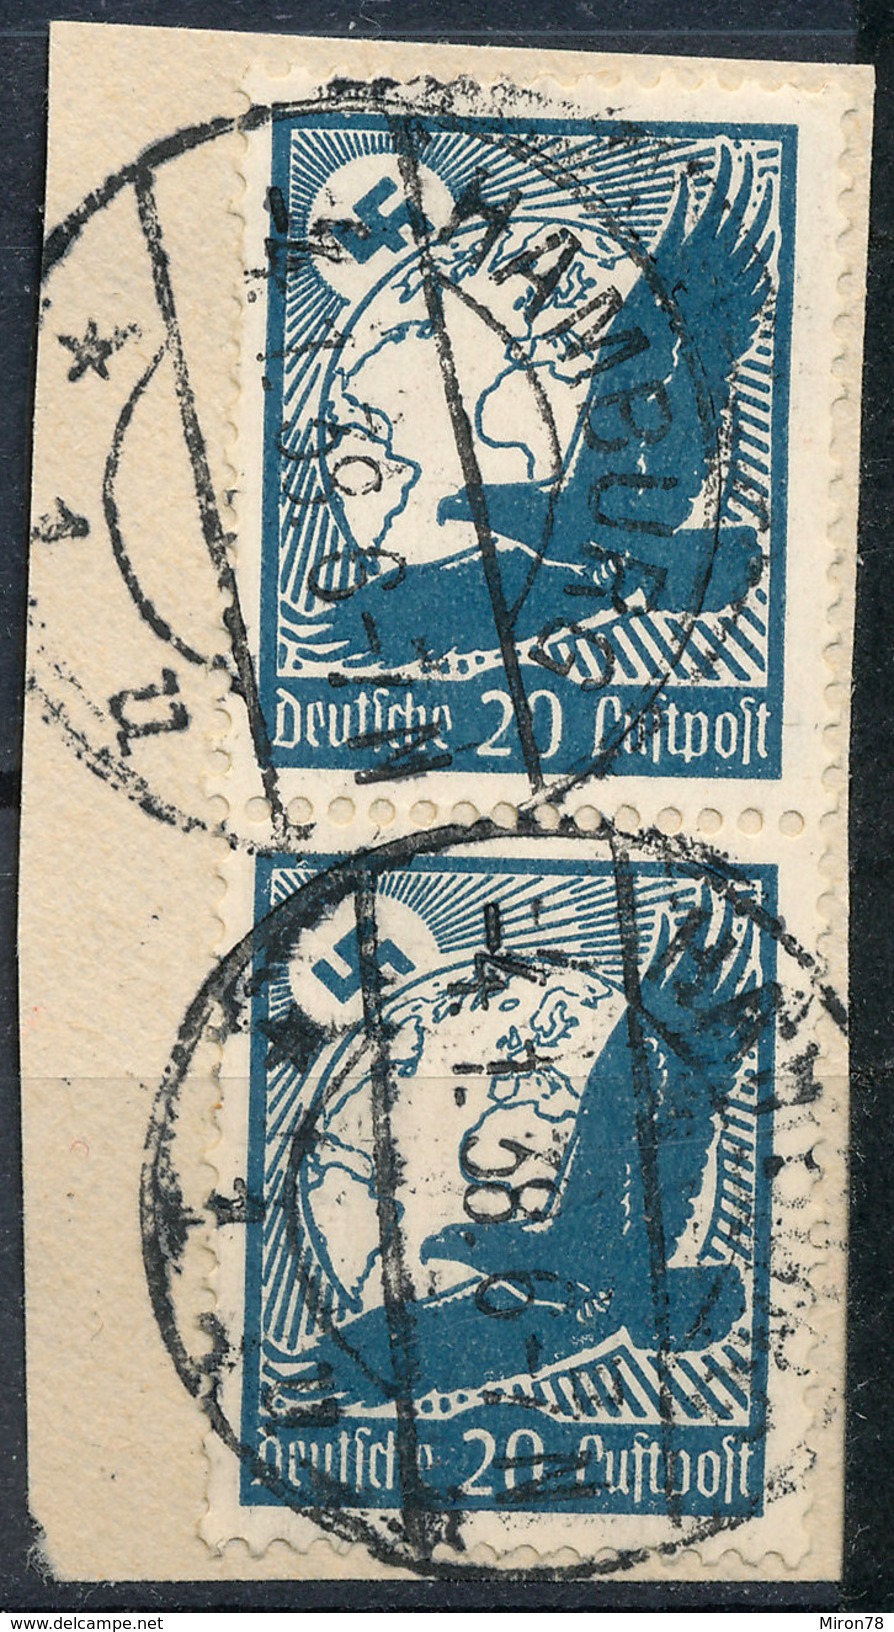 Stamp Germany Airmail Zeppelin 1934 Used Lot#25 - Airmail & Zeppelin